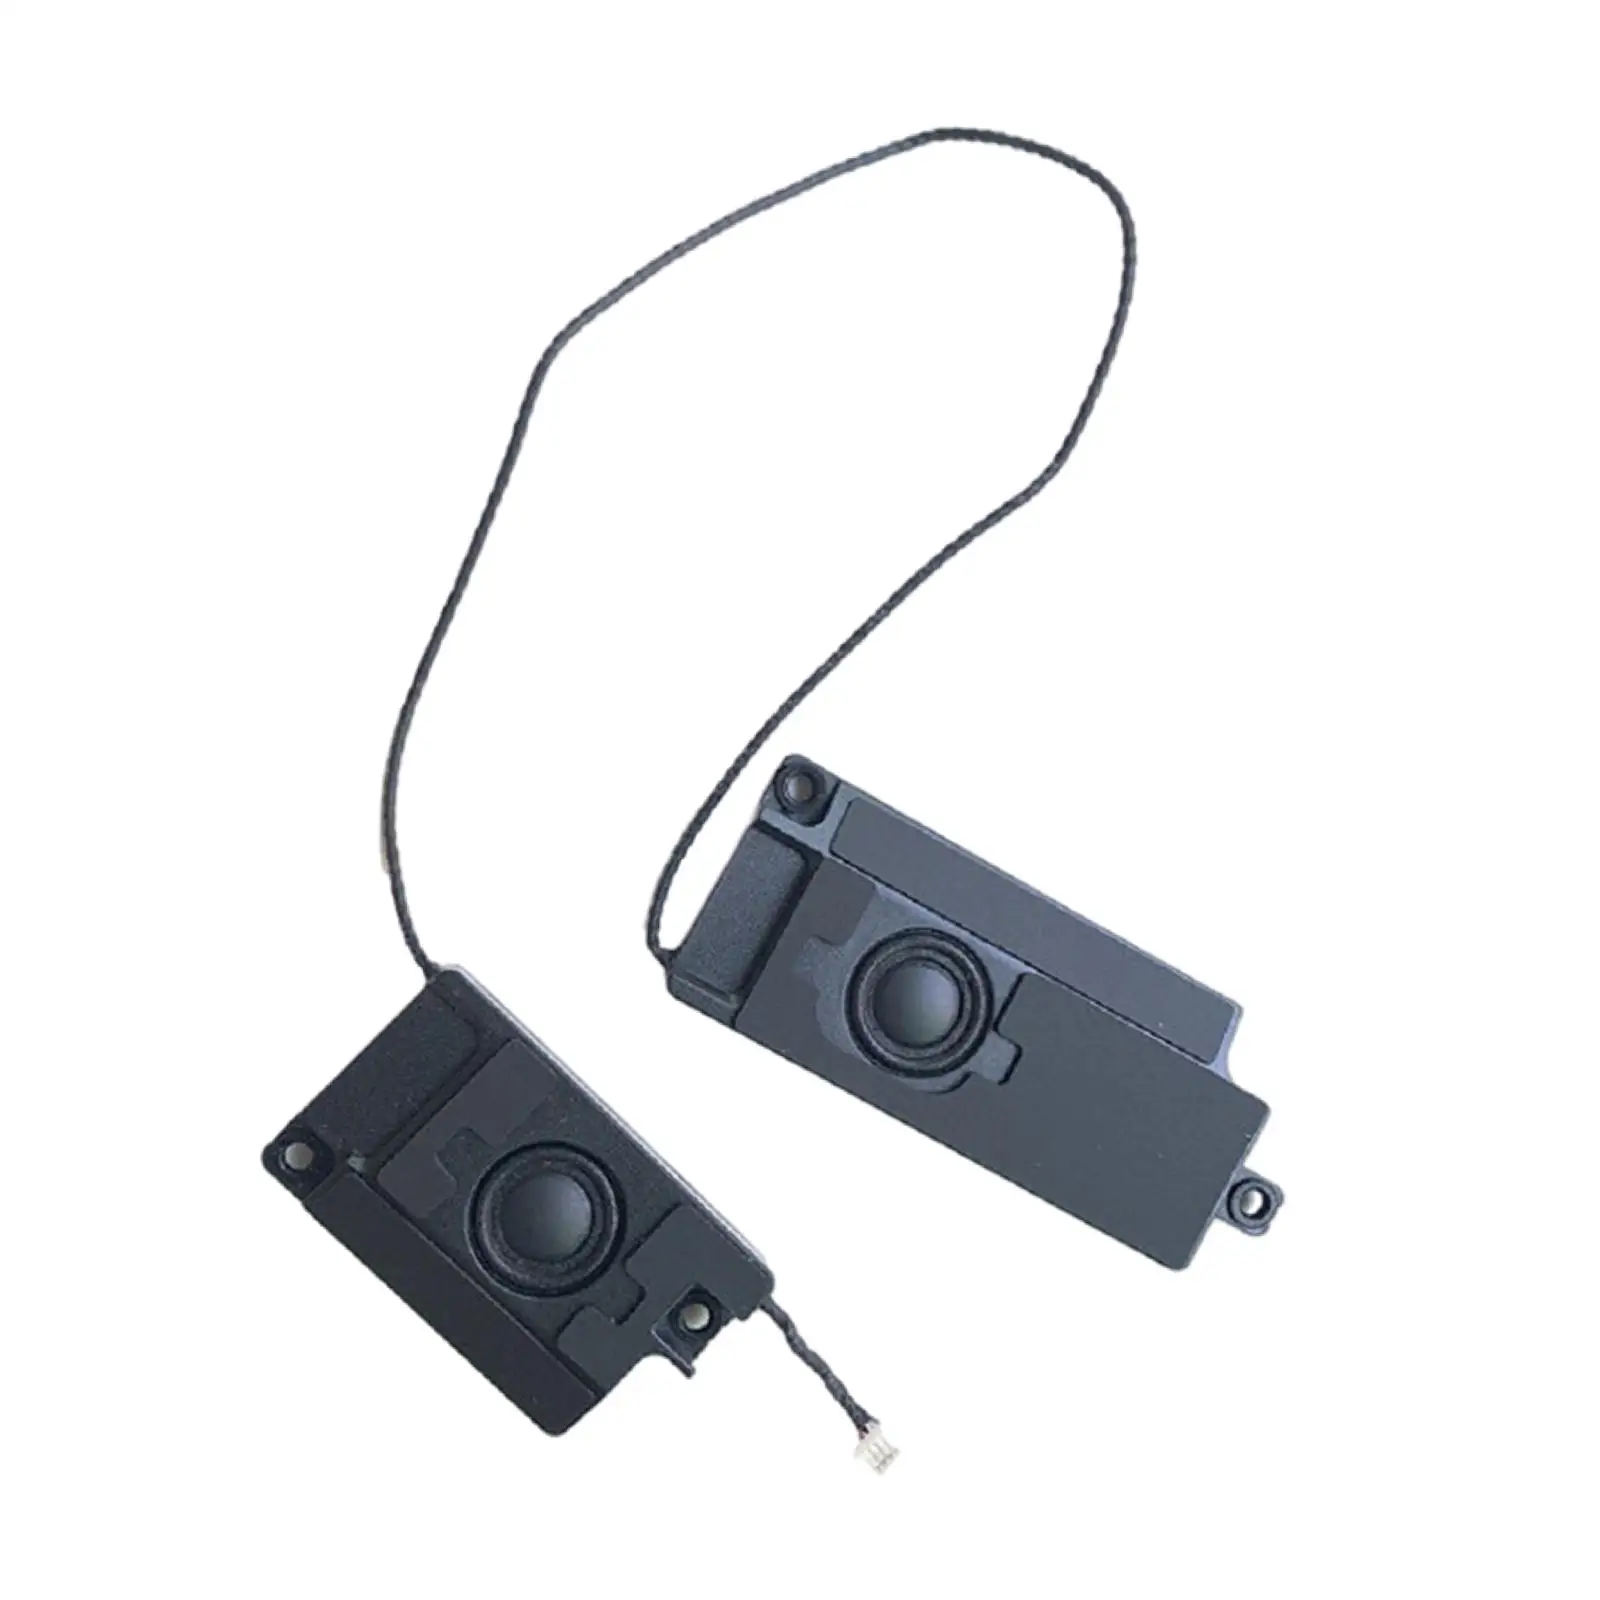 2 Pieces Built-In Speakers 02HL004 L and R Replace Part for Lenovo x390 x395 ThinkPad Laptop Notebook